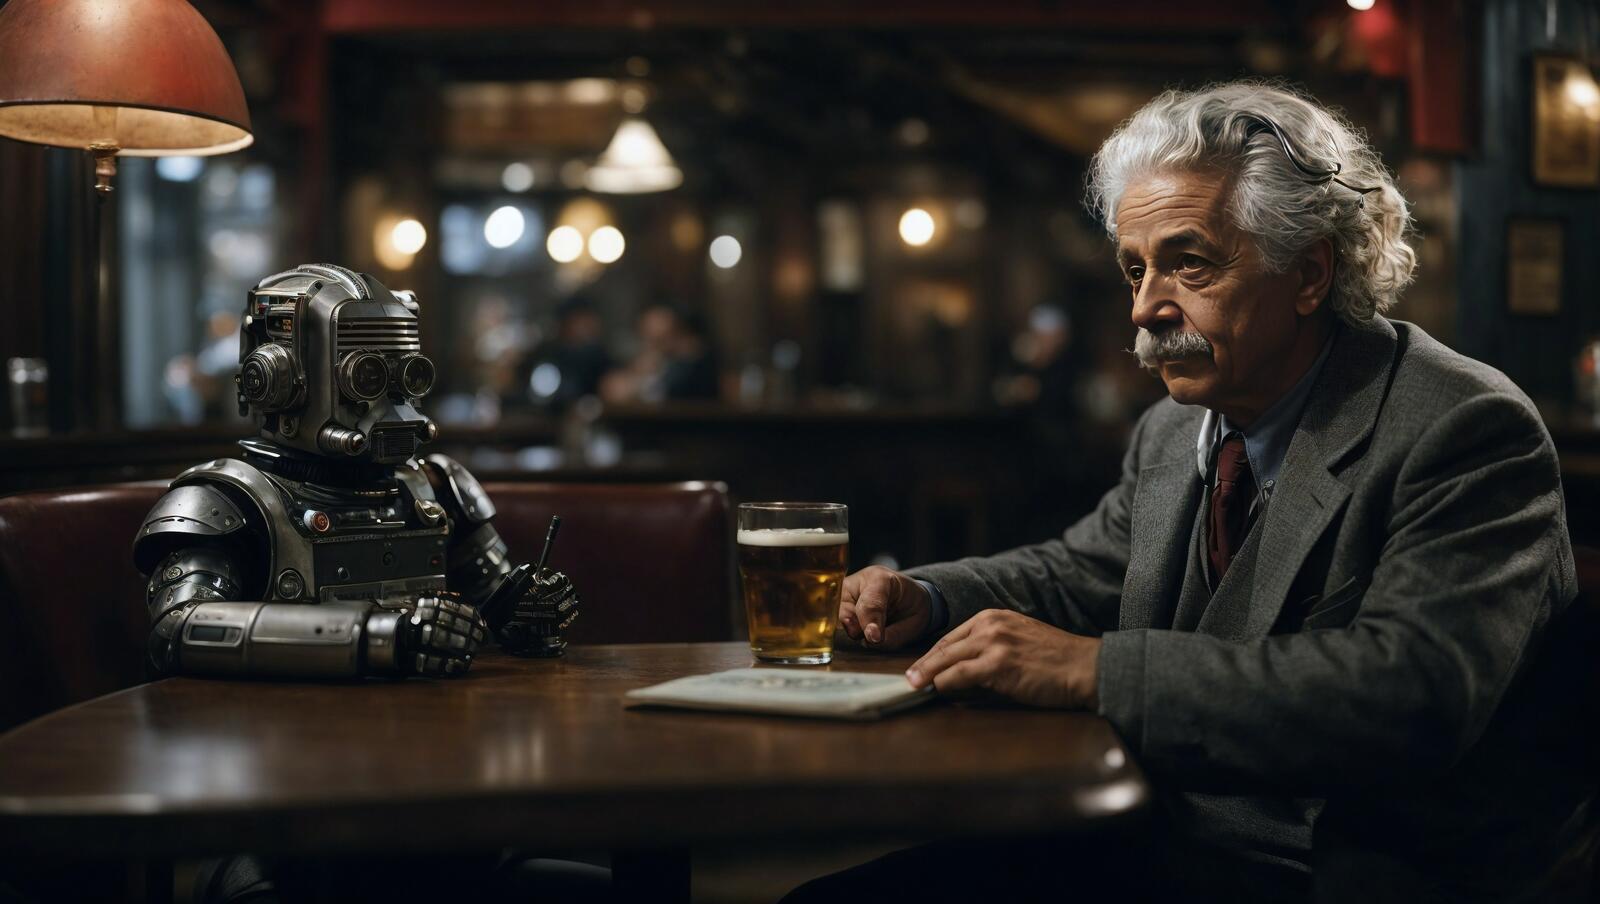 Free photo A man with grey hair and gray shirt sitting at a table next to a star wars robot